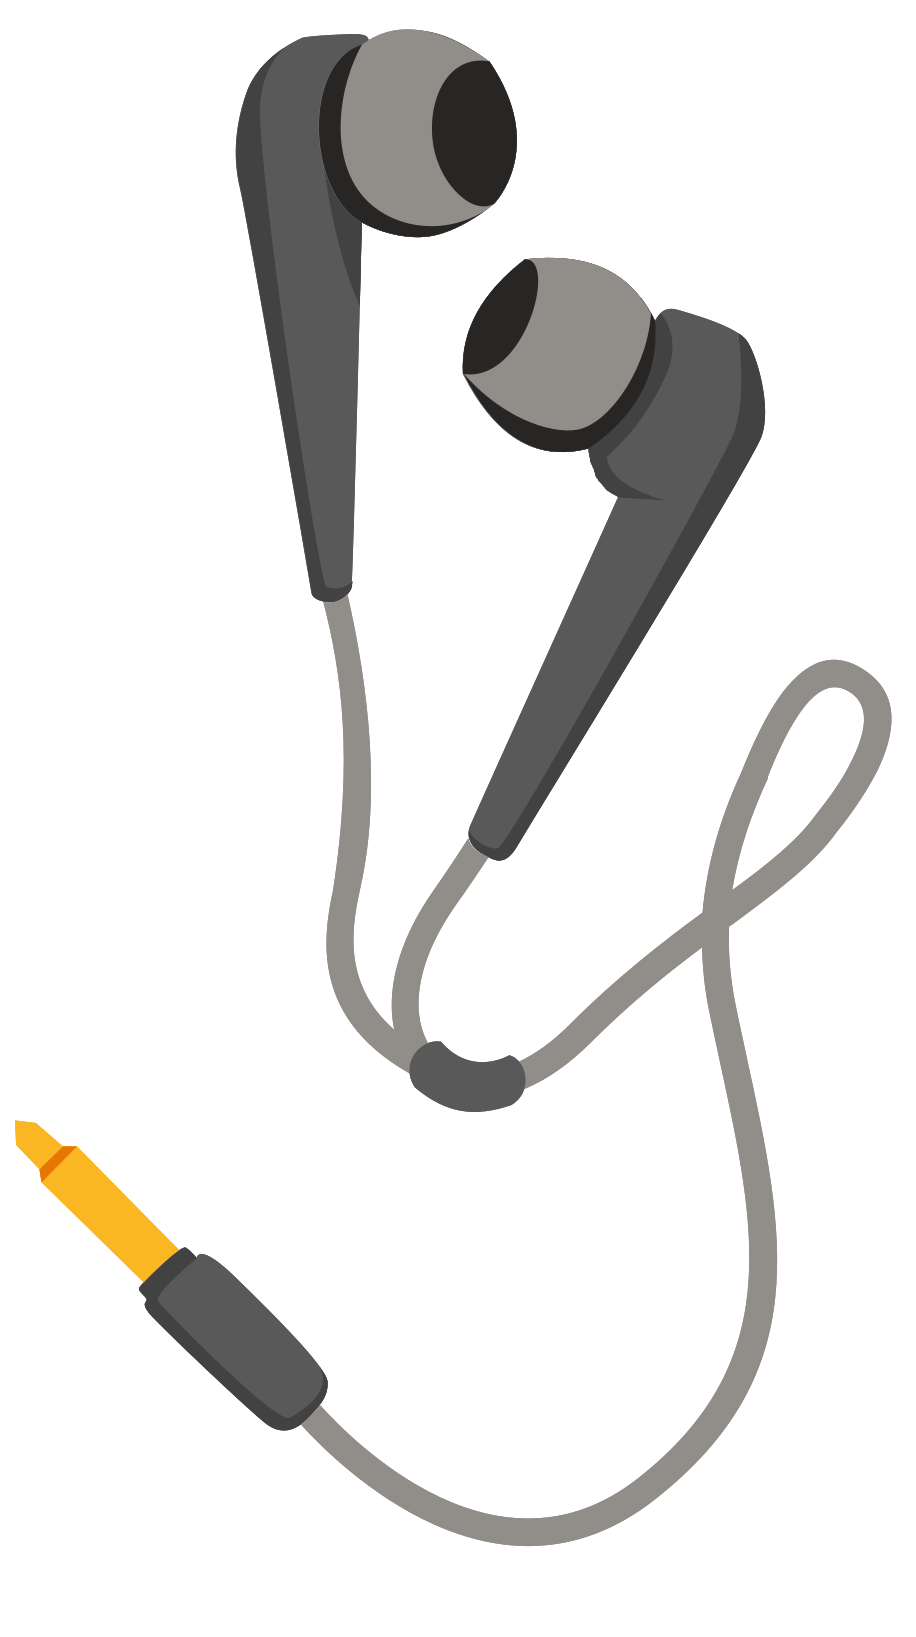 Download PNG image - Android Earphone PNG Image 